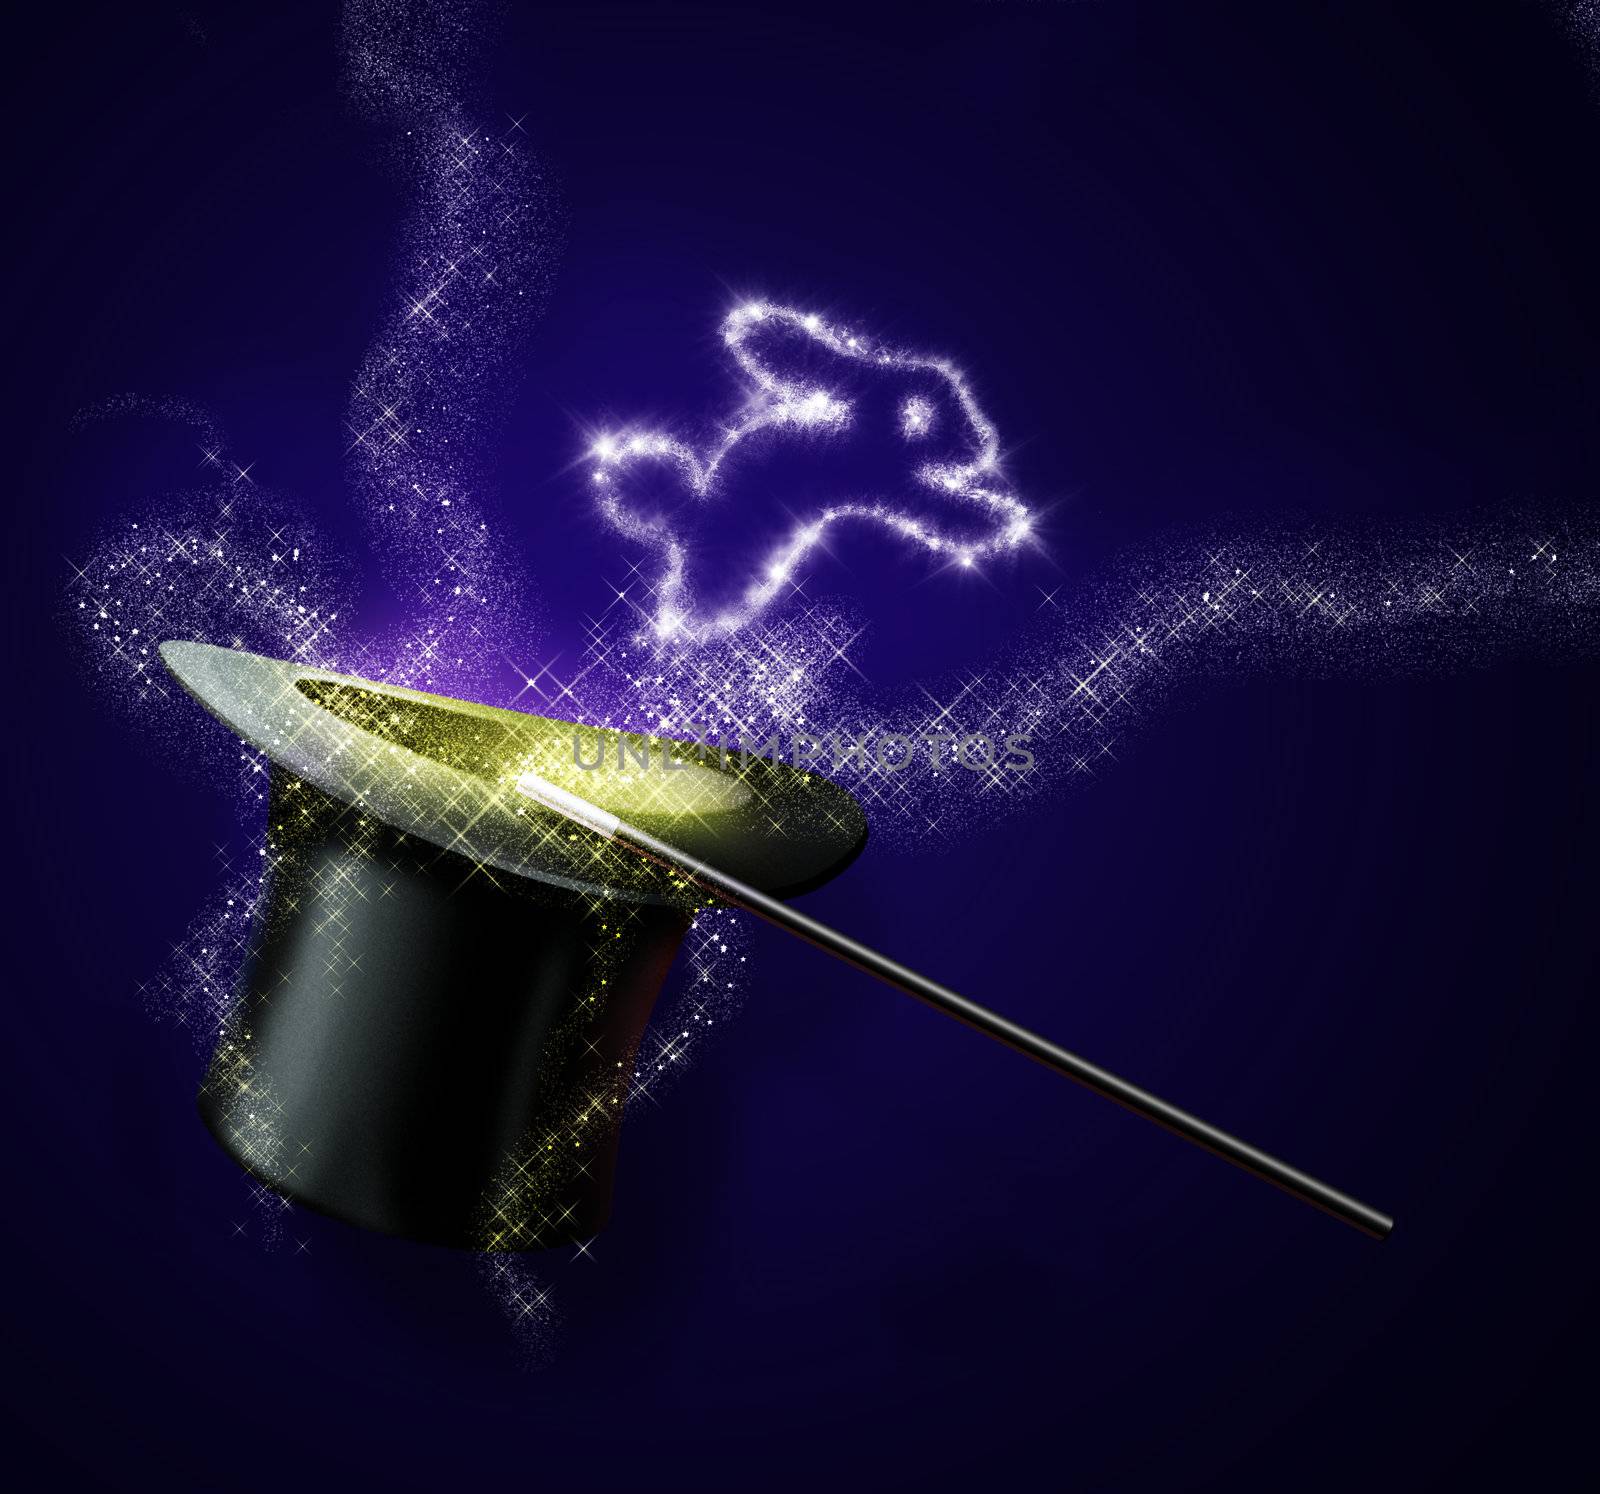 light rabbit jump out from magic black hat  and magic wand isolated on purple blackground